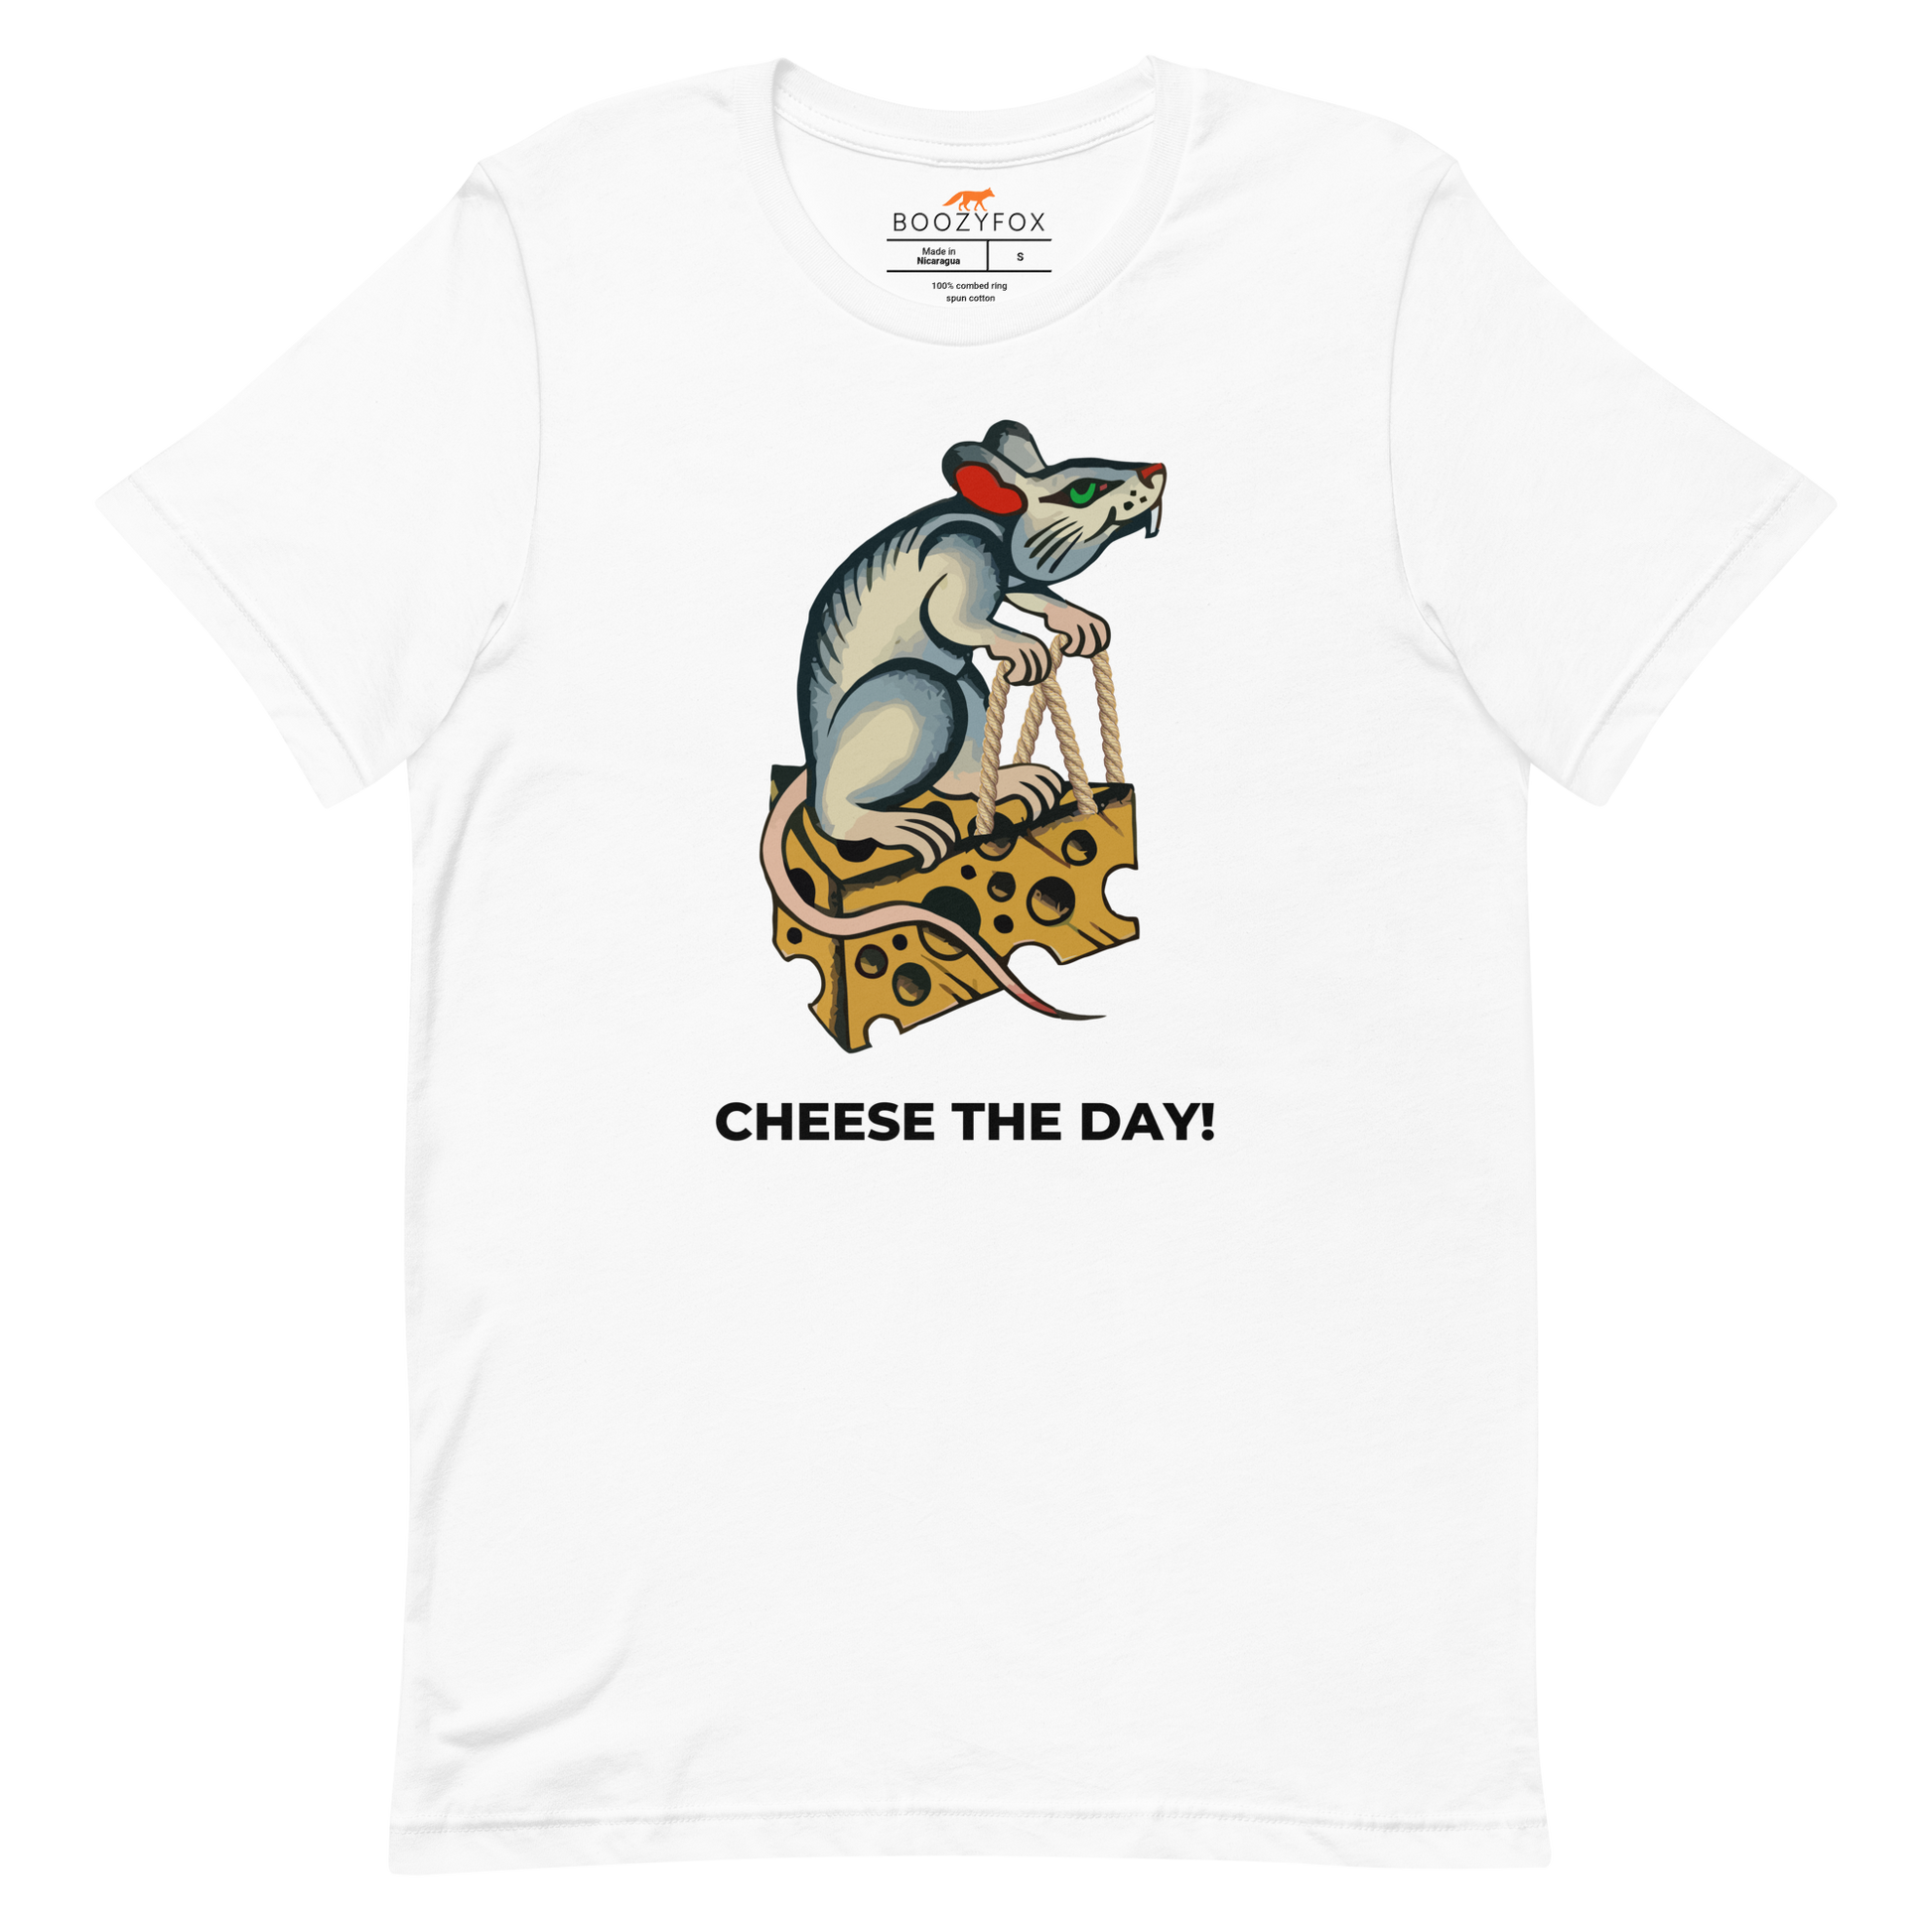 White Premium Rat T-Shirt featuring a hilarious Cheese The Day graphic on the chest - Funny Graphic Rat Tees - Boozy Fox